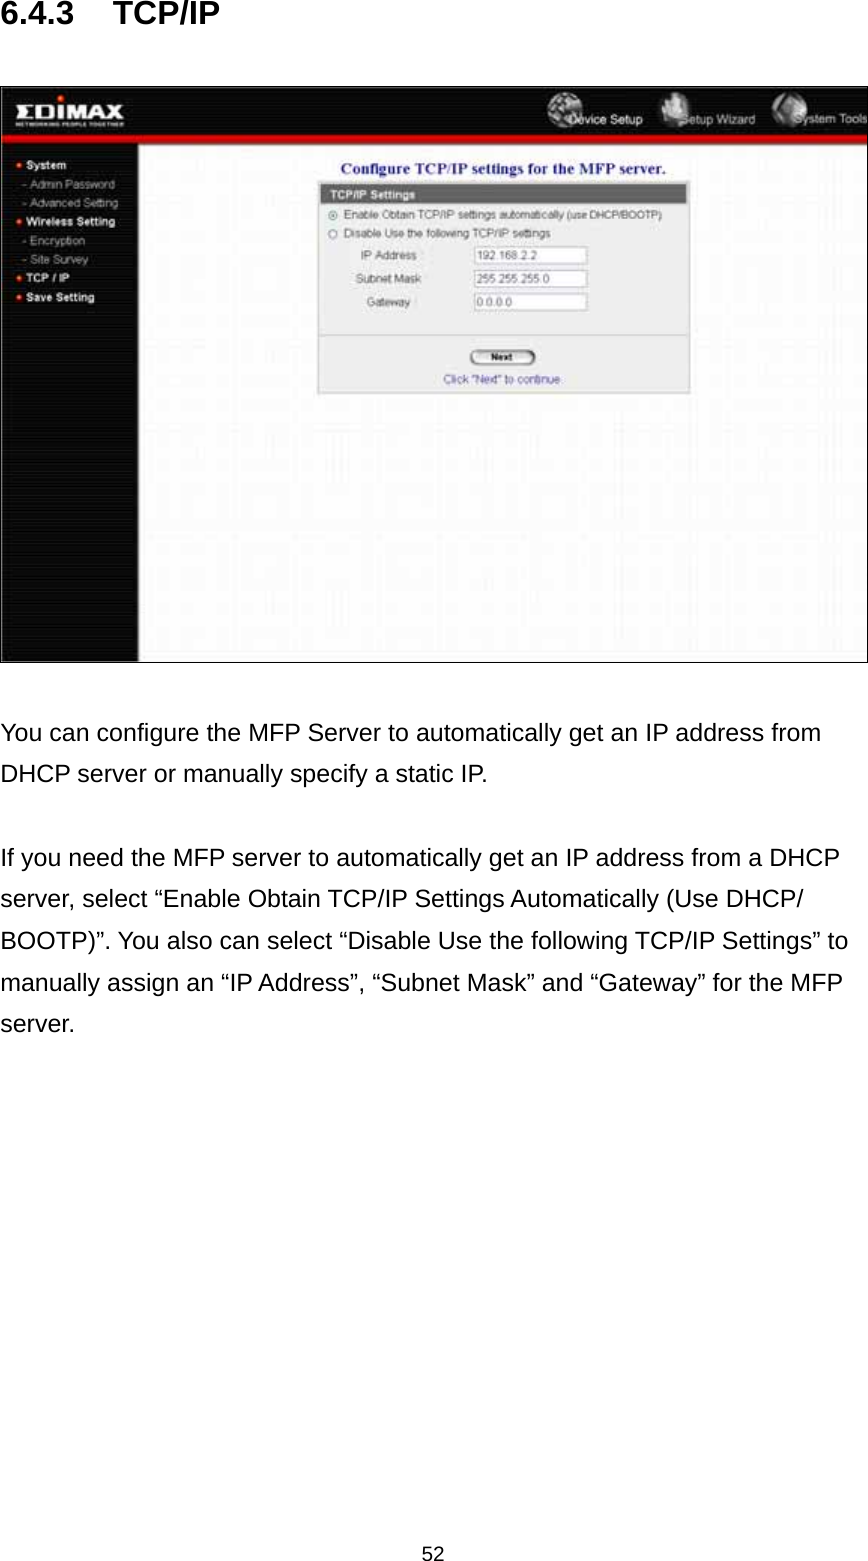 52 6.4.3 TCP/IP    You can configure the MFP Server to automatically get an IP address from DHCP server or manually specify a static IP.  If you need the MFP server to automatically get an IP address from a DHCP server, select “Enable Obtain TCP/IP Settings Automatically (Use DHCP/ BOOTP)”. You also can select “Disable Use the following TCP/IP Settings” to manually assign an “IP Address”, “Subnet Mask” and “Gateway” for the MFP server.         